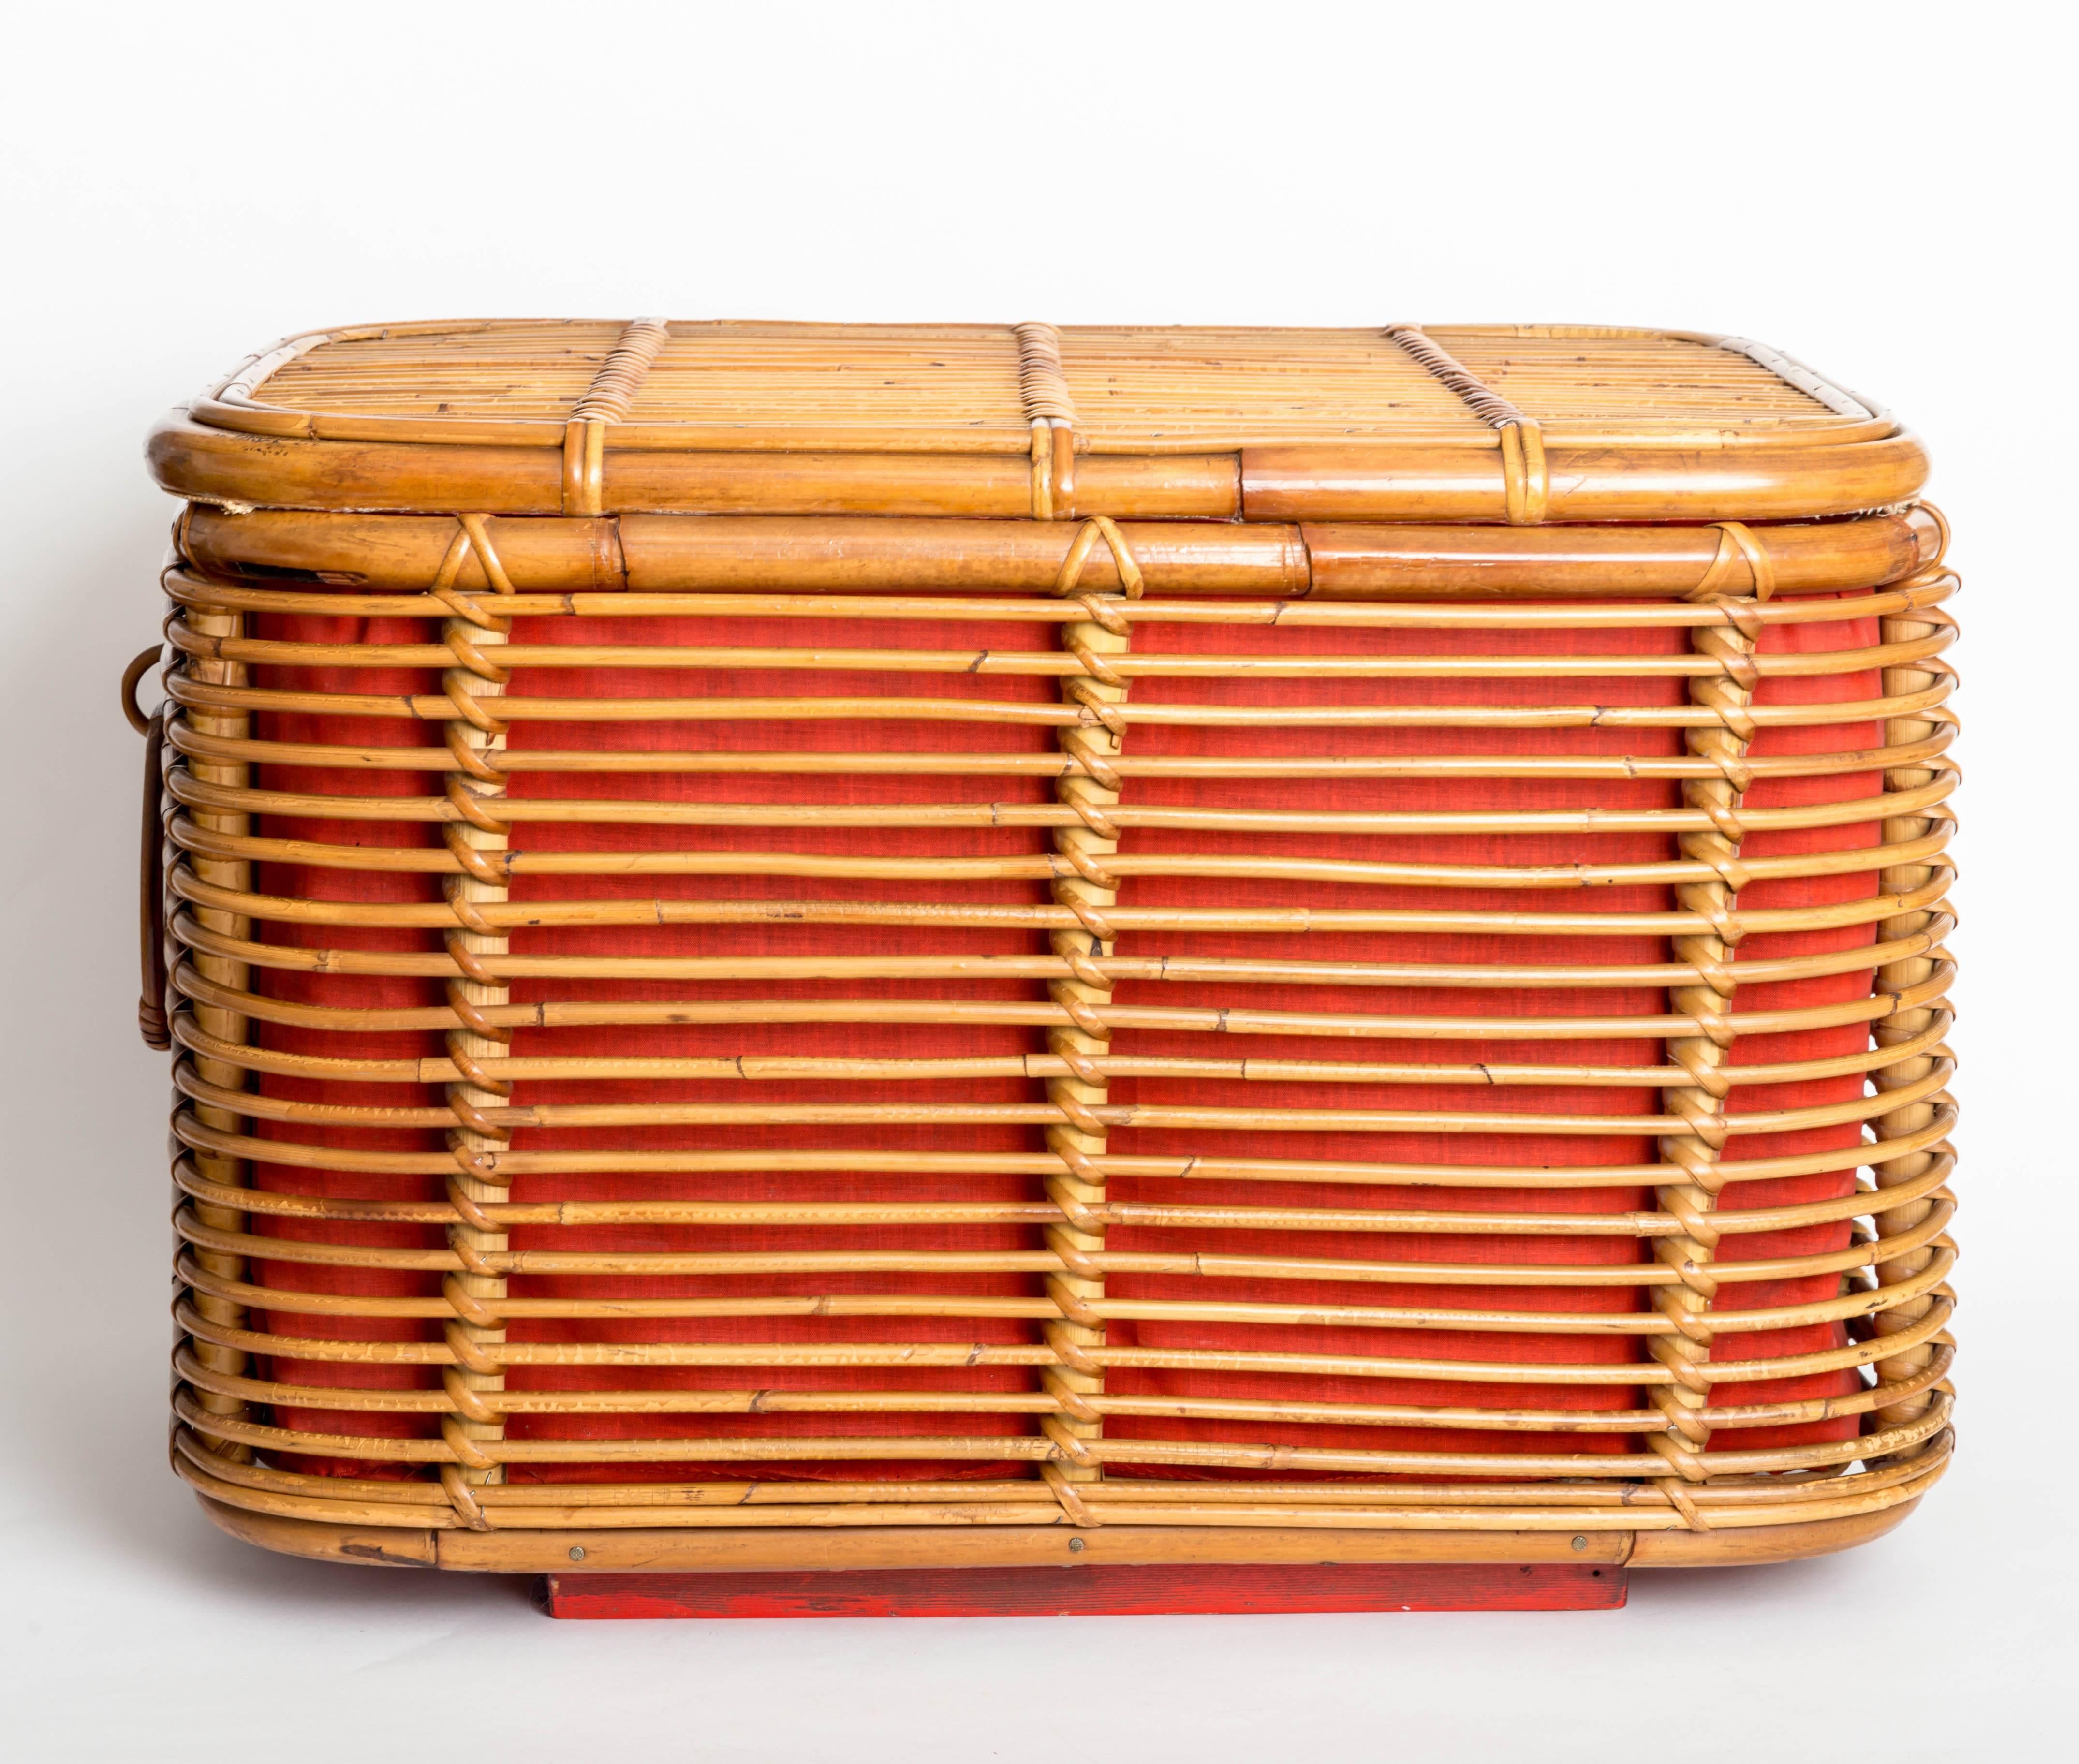 20th Century Rattan Ottoman or Storage Chest with Fabric Lining